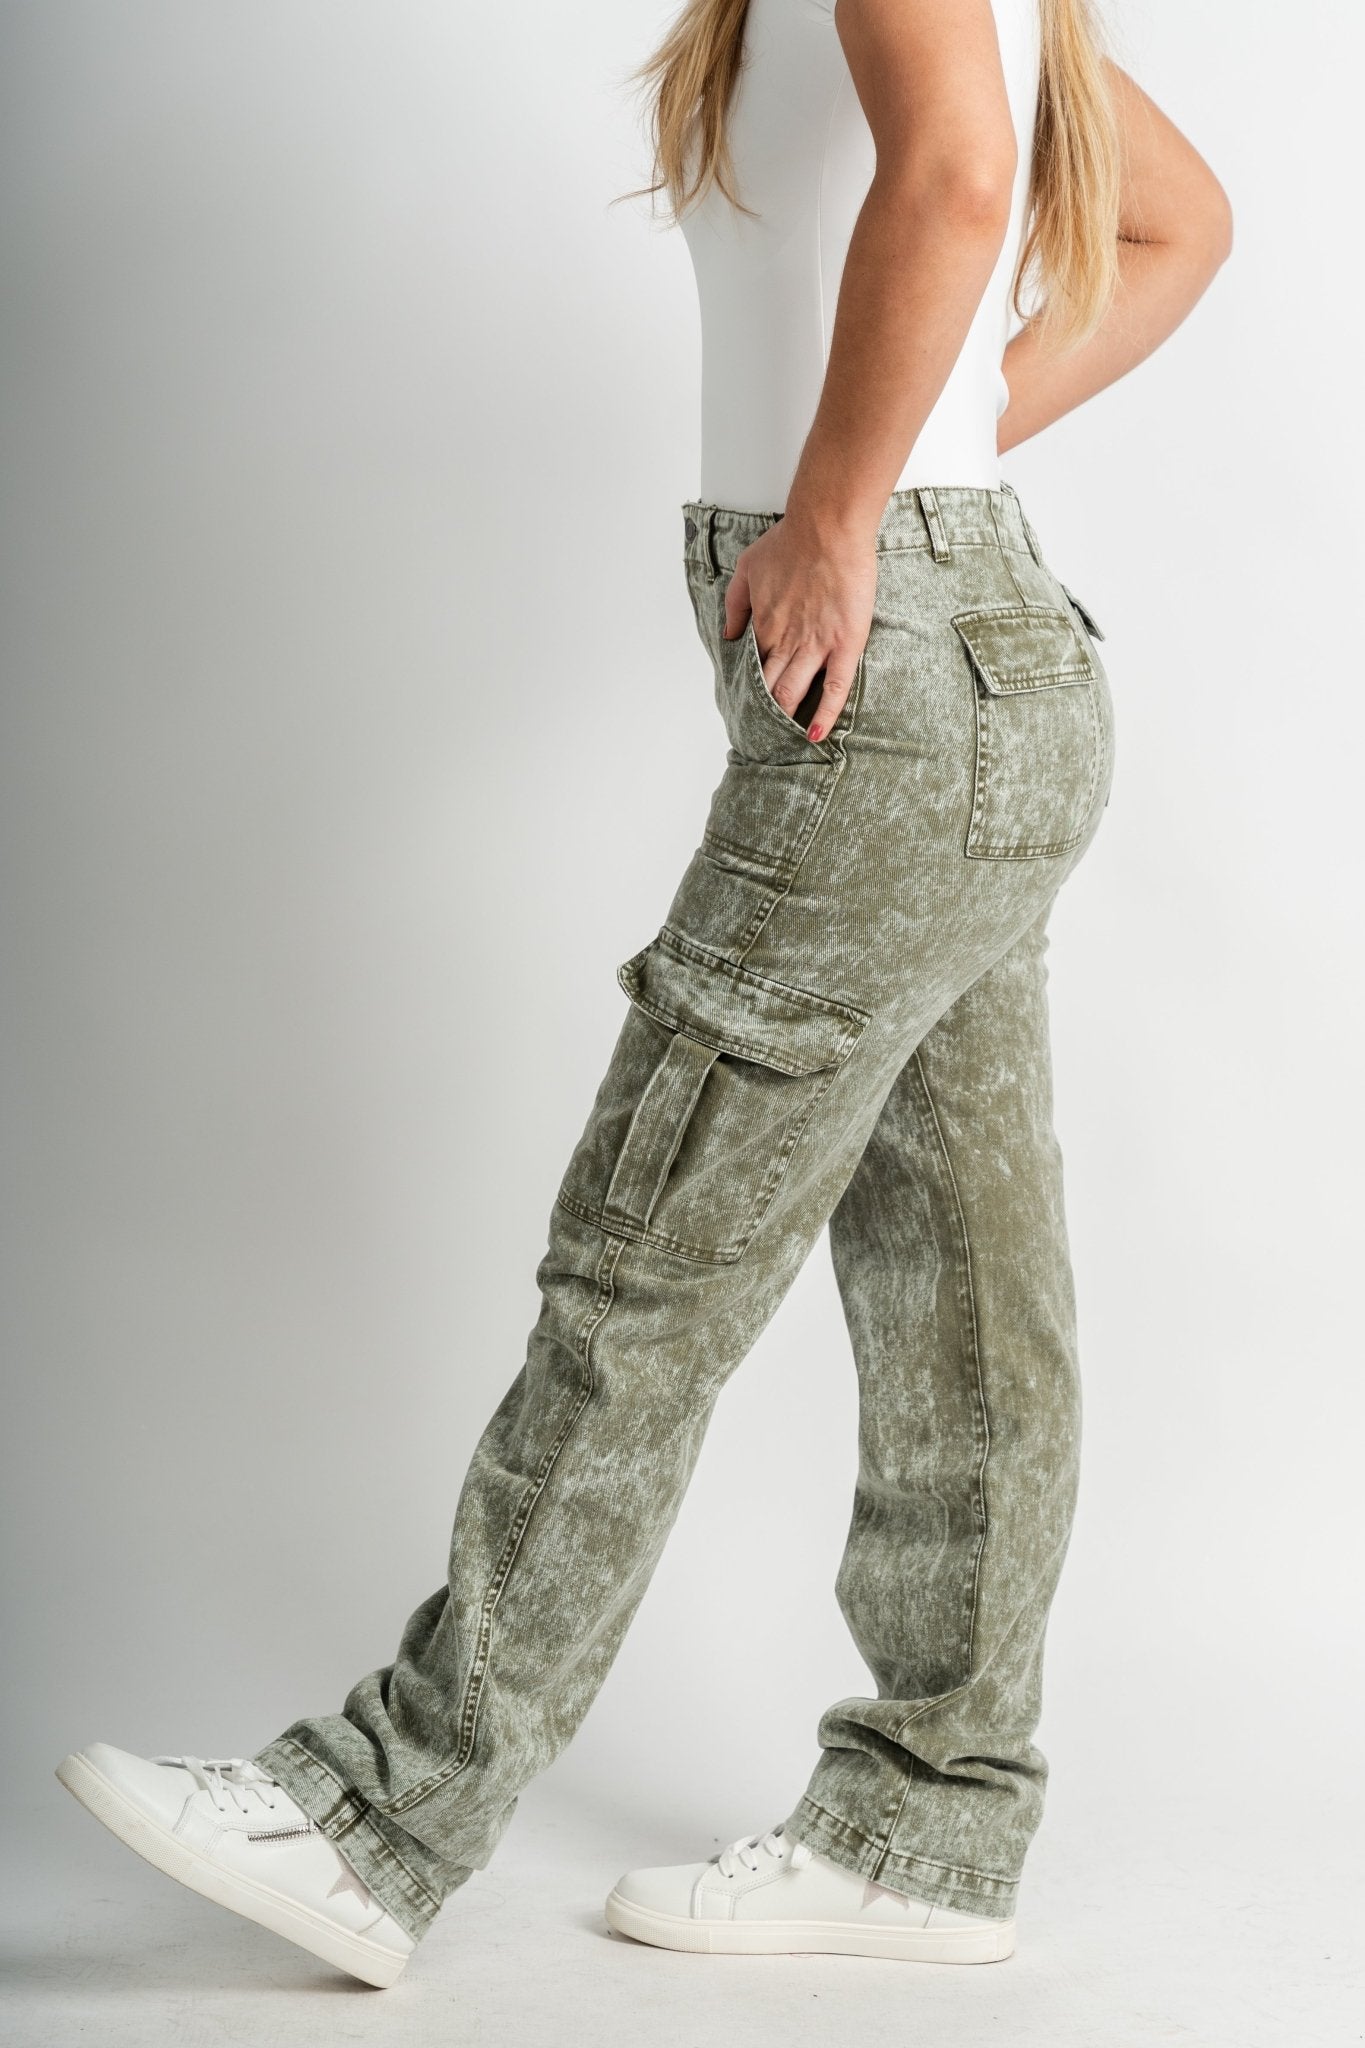 These $11 Jeans Have Been Around for 47 Years & They're Still Trending